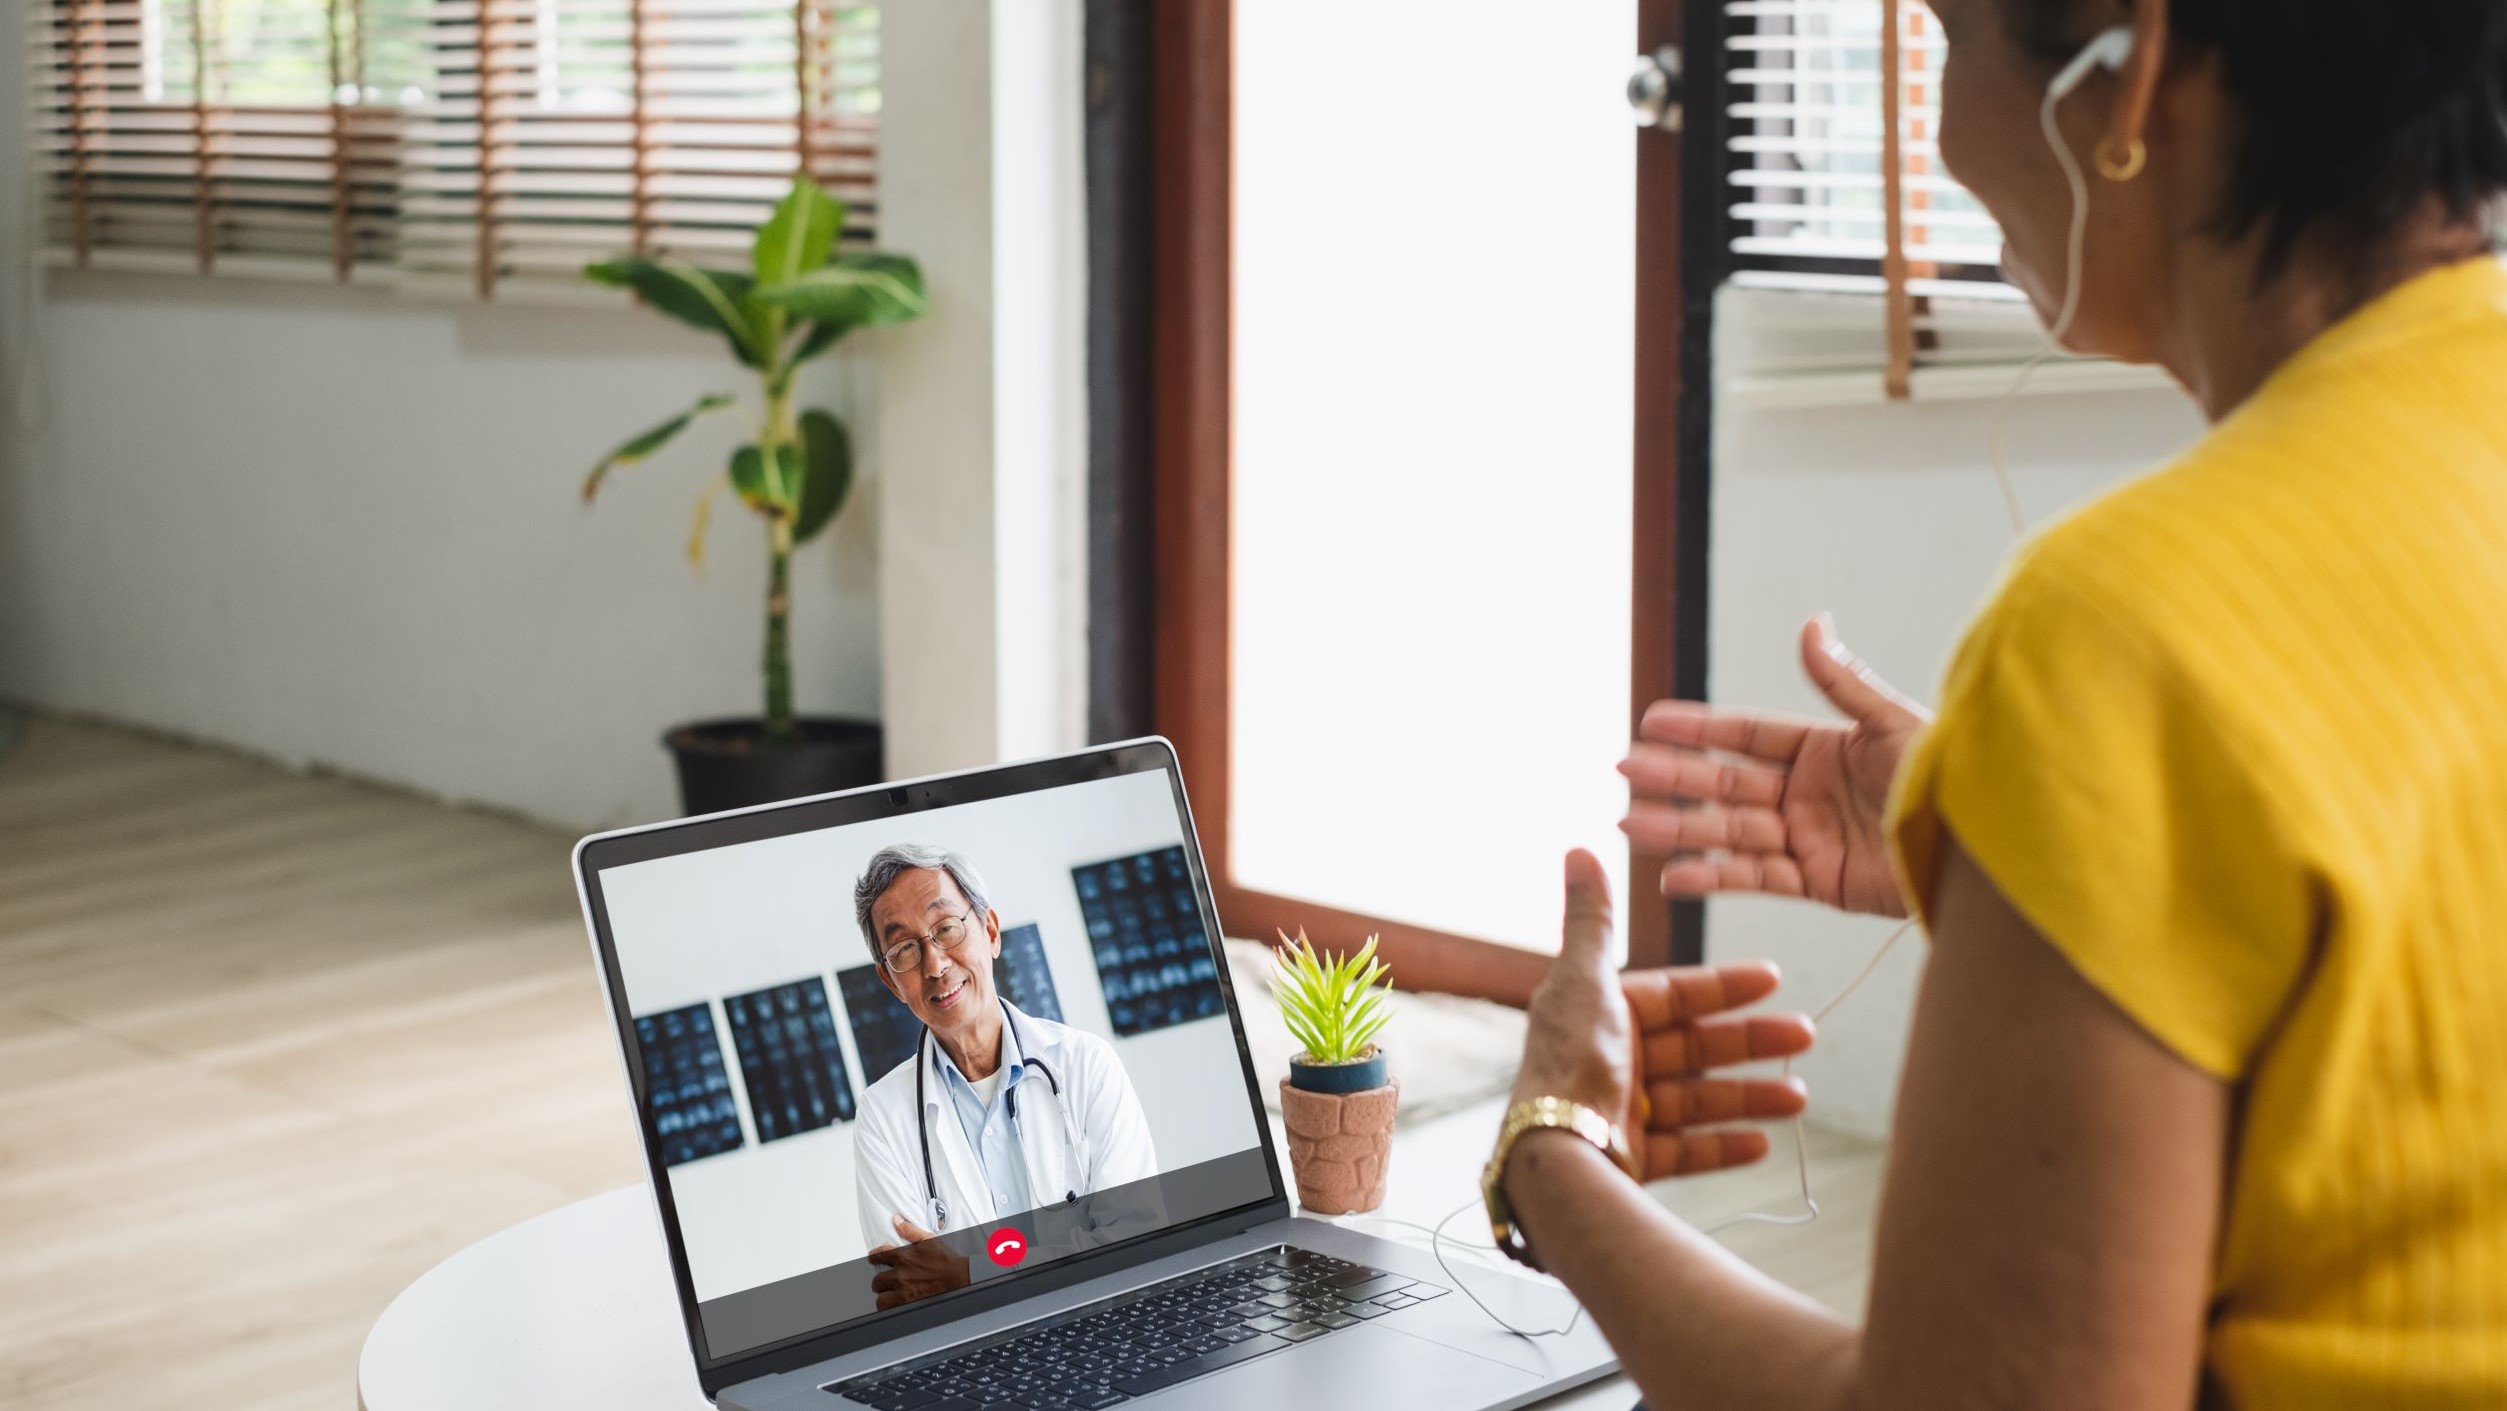 Advancements in telehealth services